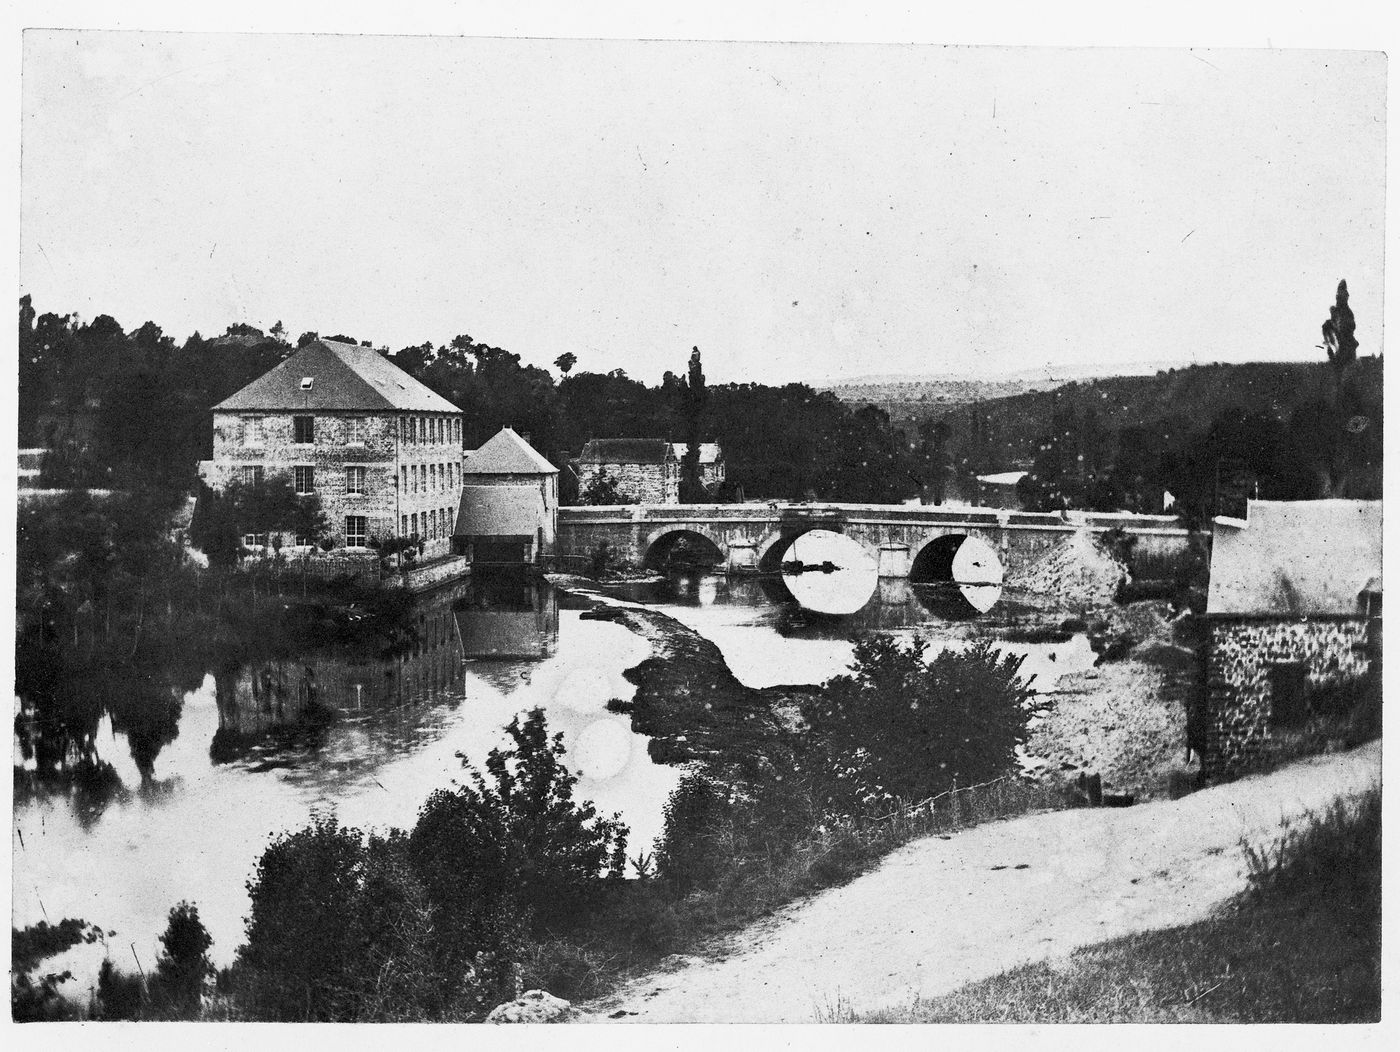 View of a stone bridge with three arches crossing the river Orne, Pont-d'Ouilly, France